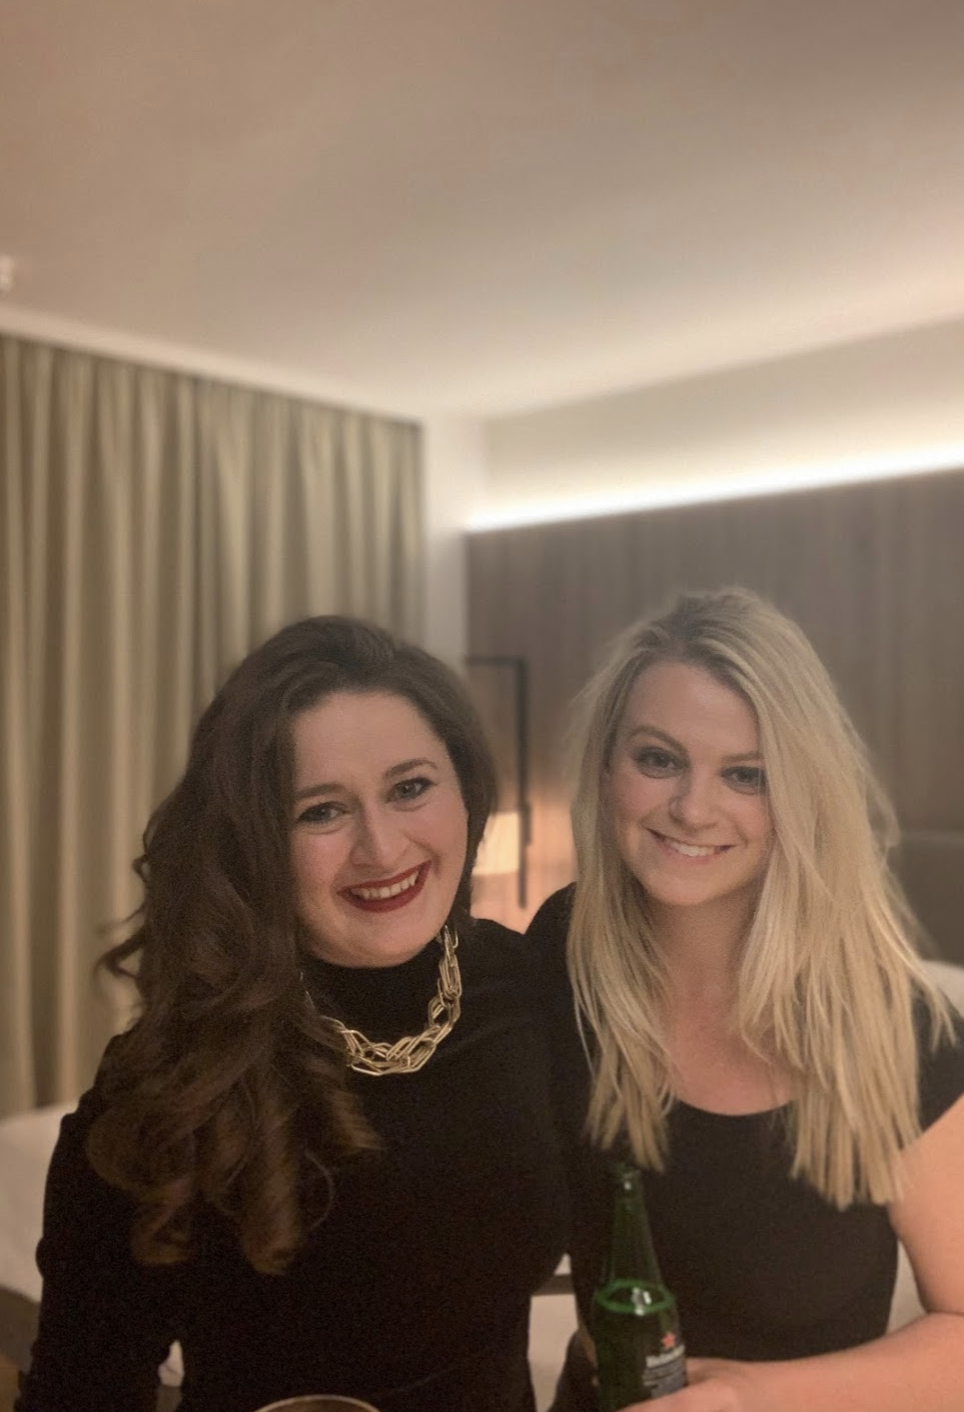 Girls getting ready for a night in Berlin